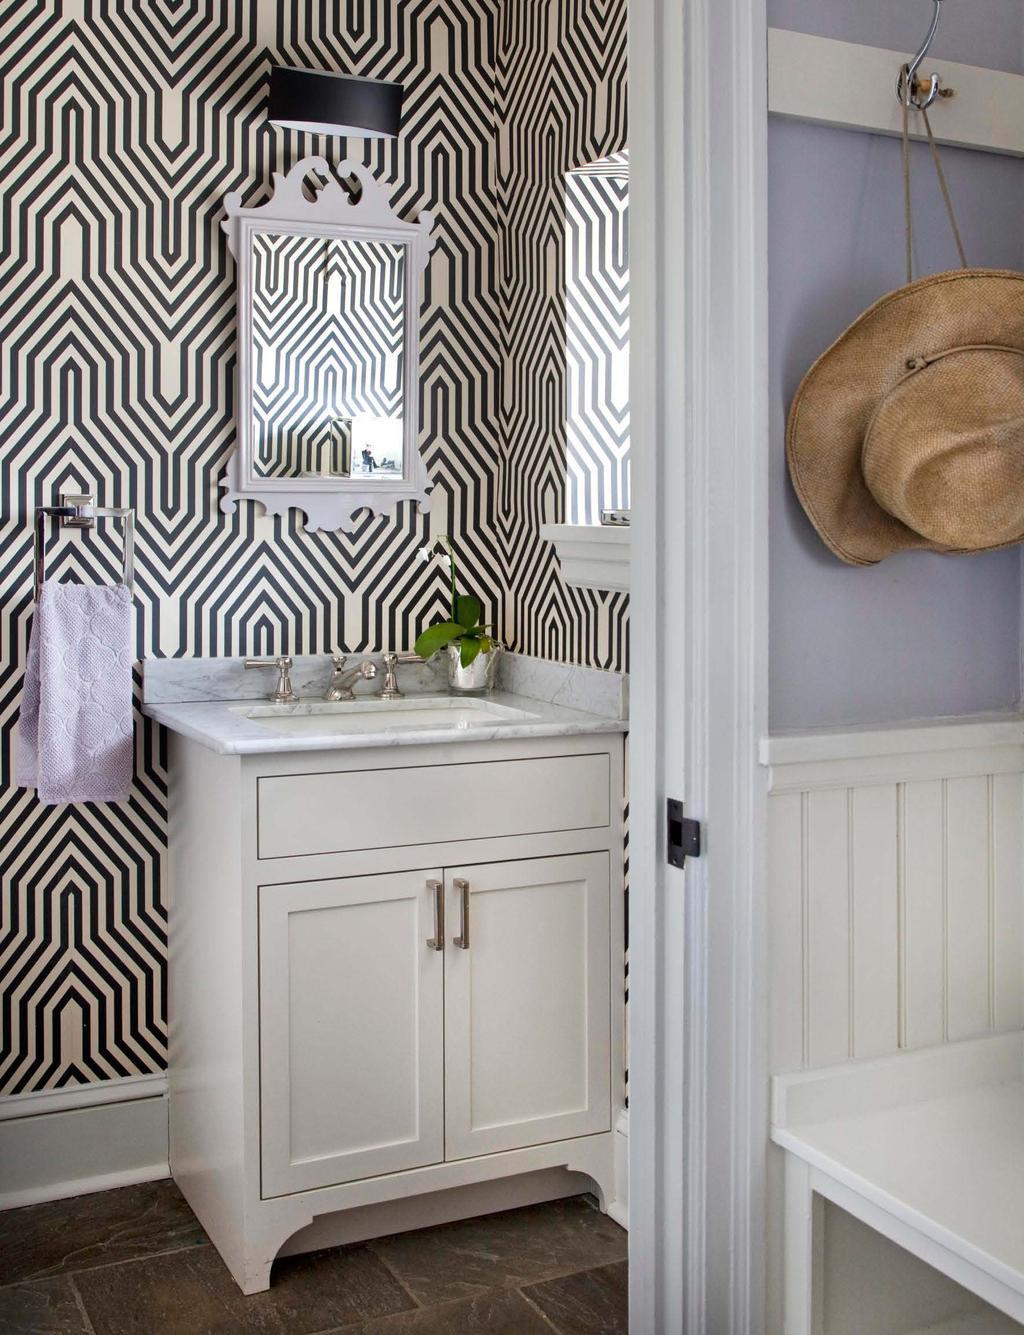 210 Powder room A bold geometric wallpaper from Osborne & Little makes this small powder